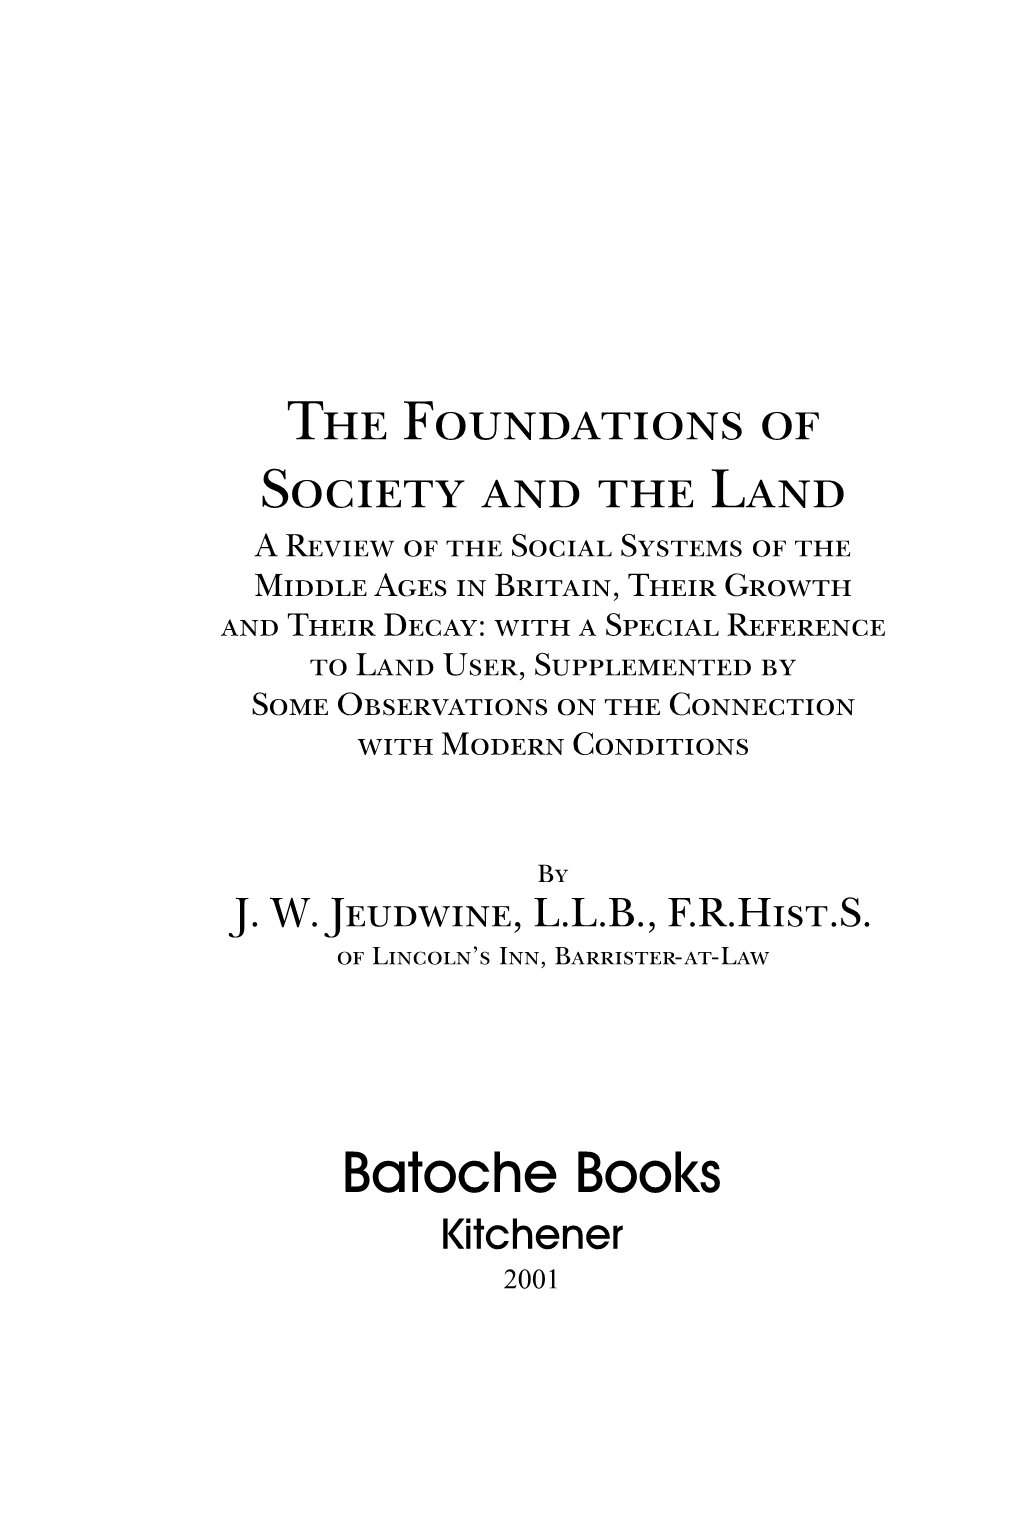 The Foundations of Society and the Land